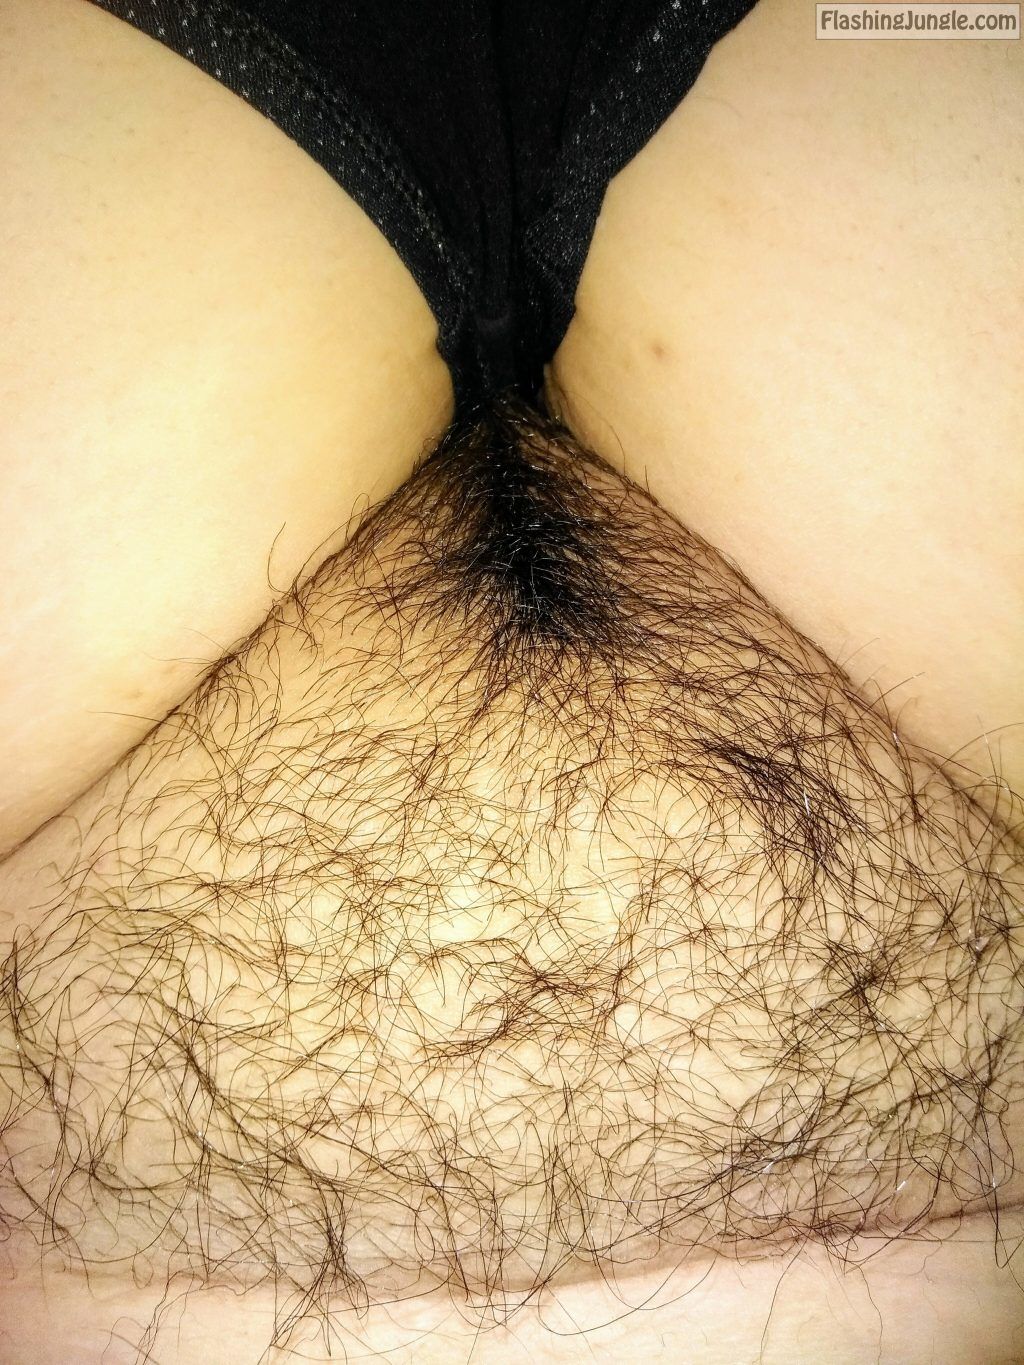 Real Amateurs Pussy Flash Pics Boobs Flash Pics  :     Sharing hairy cunt and swollen tits of my pregnant Desi wife